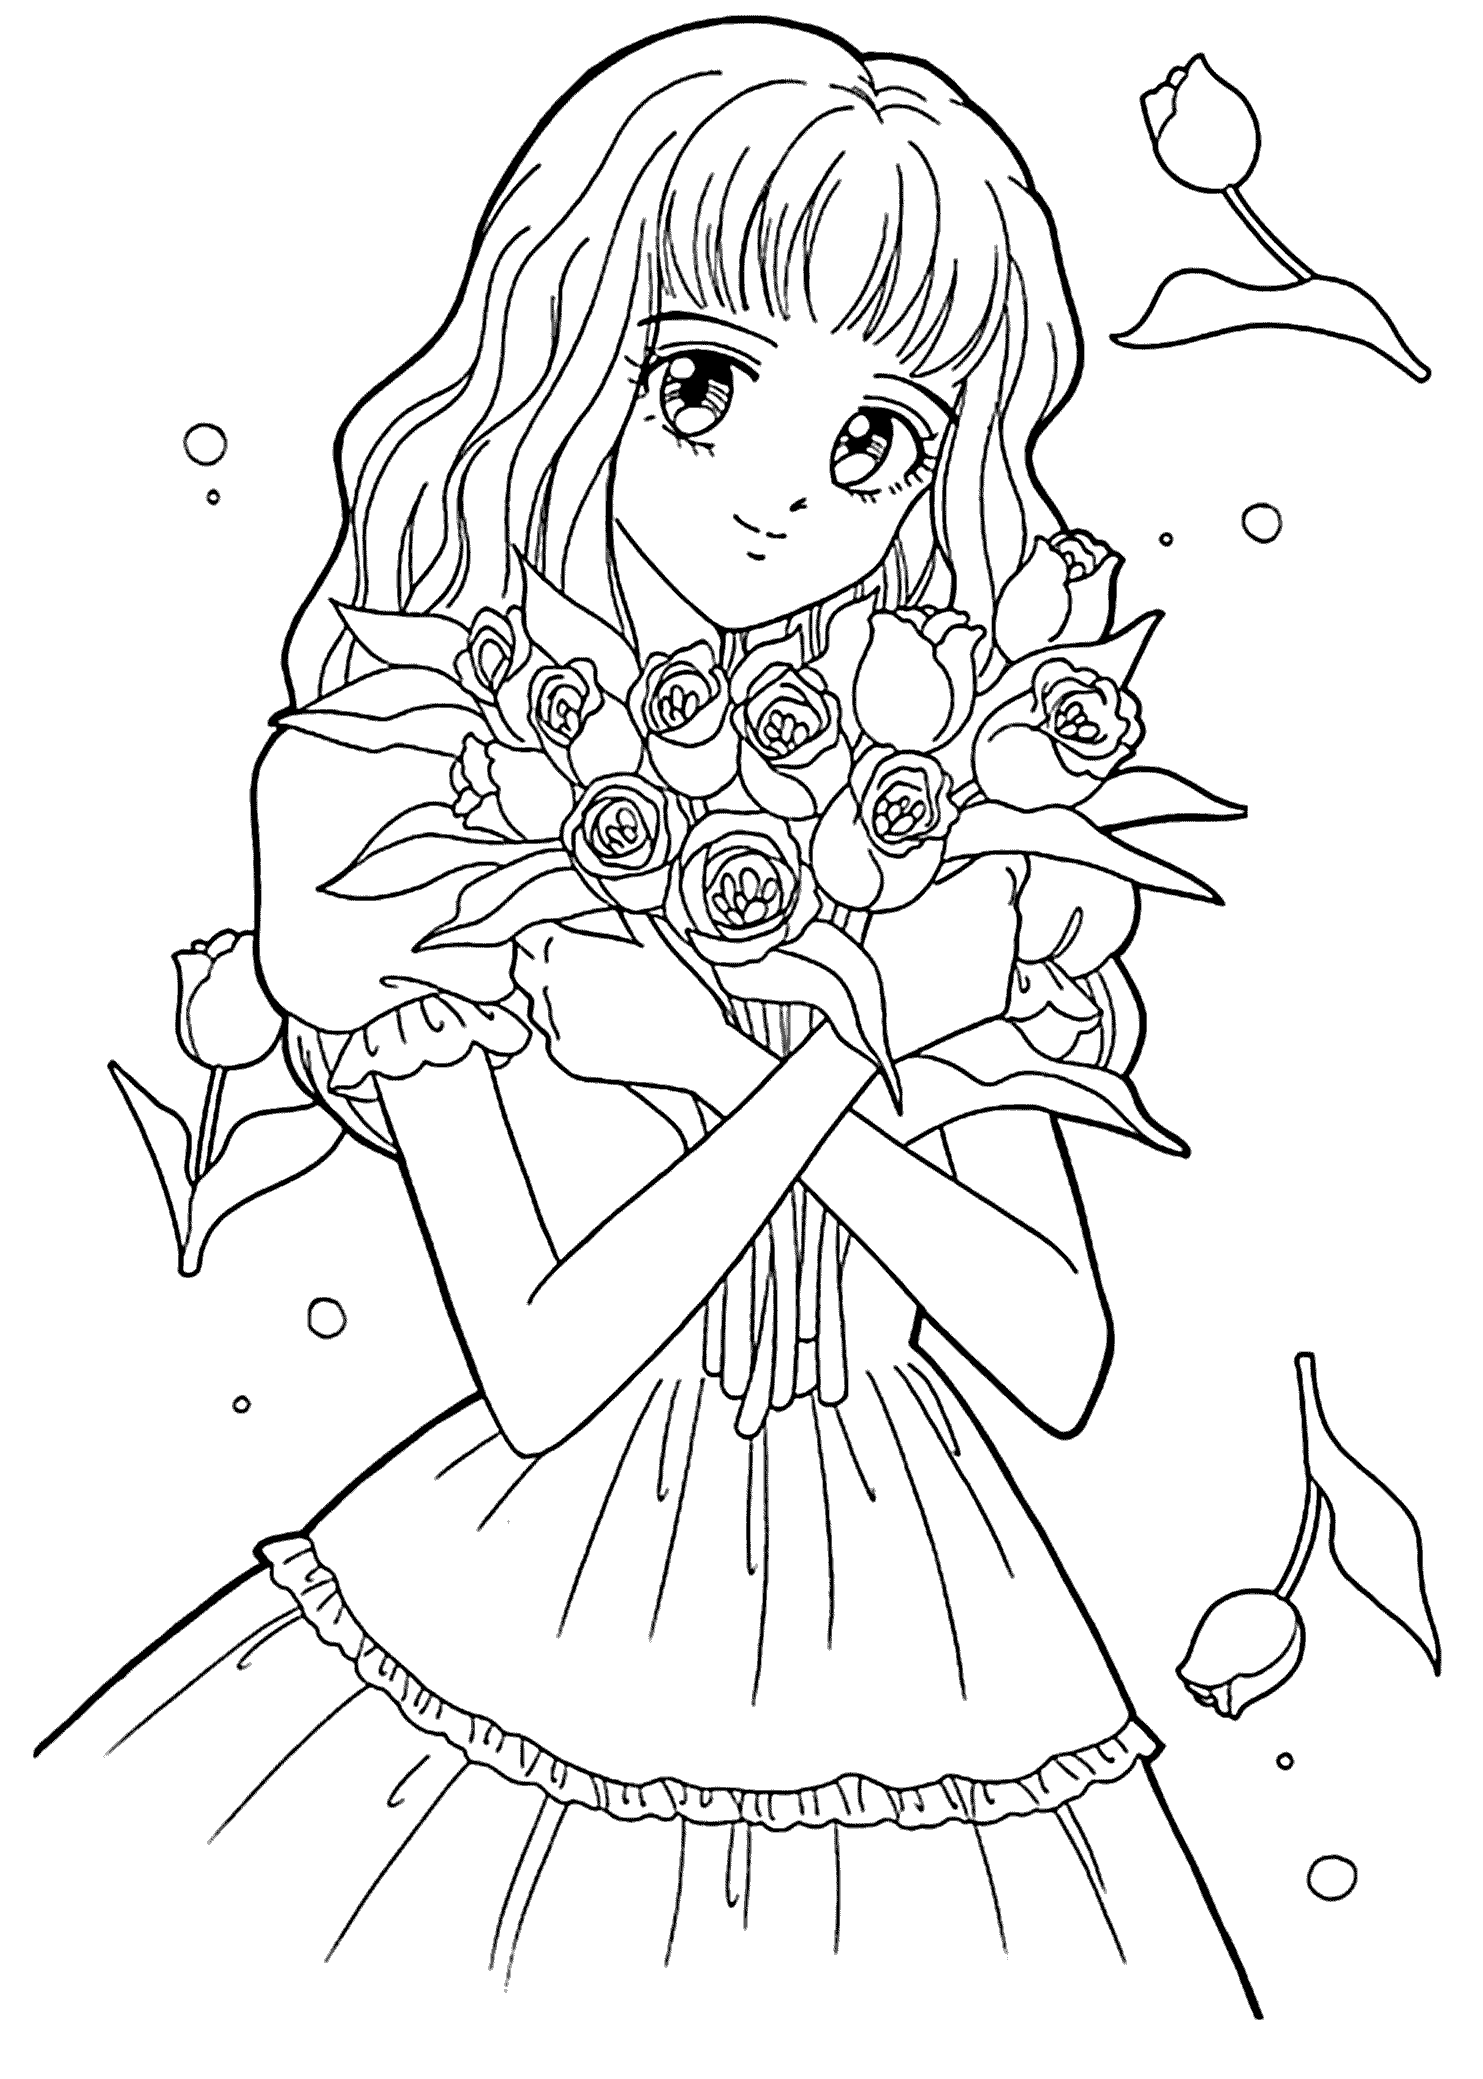 coloring pages for teens girls